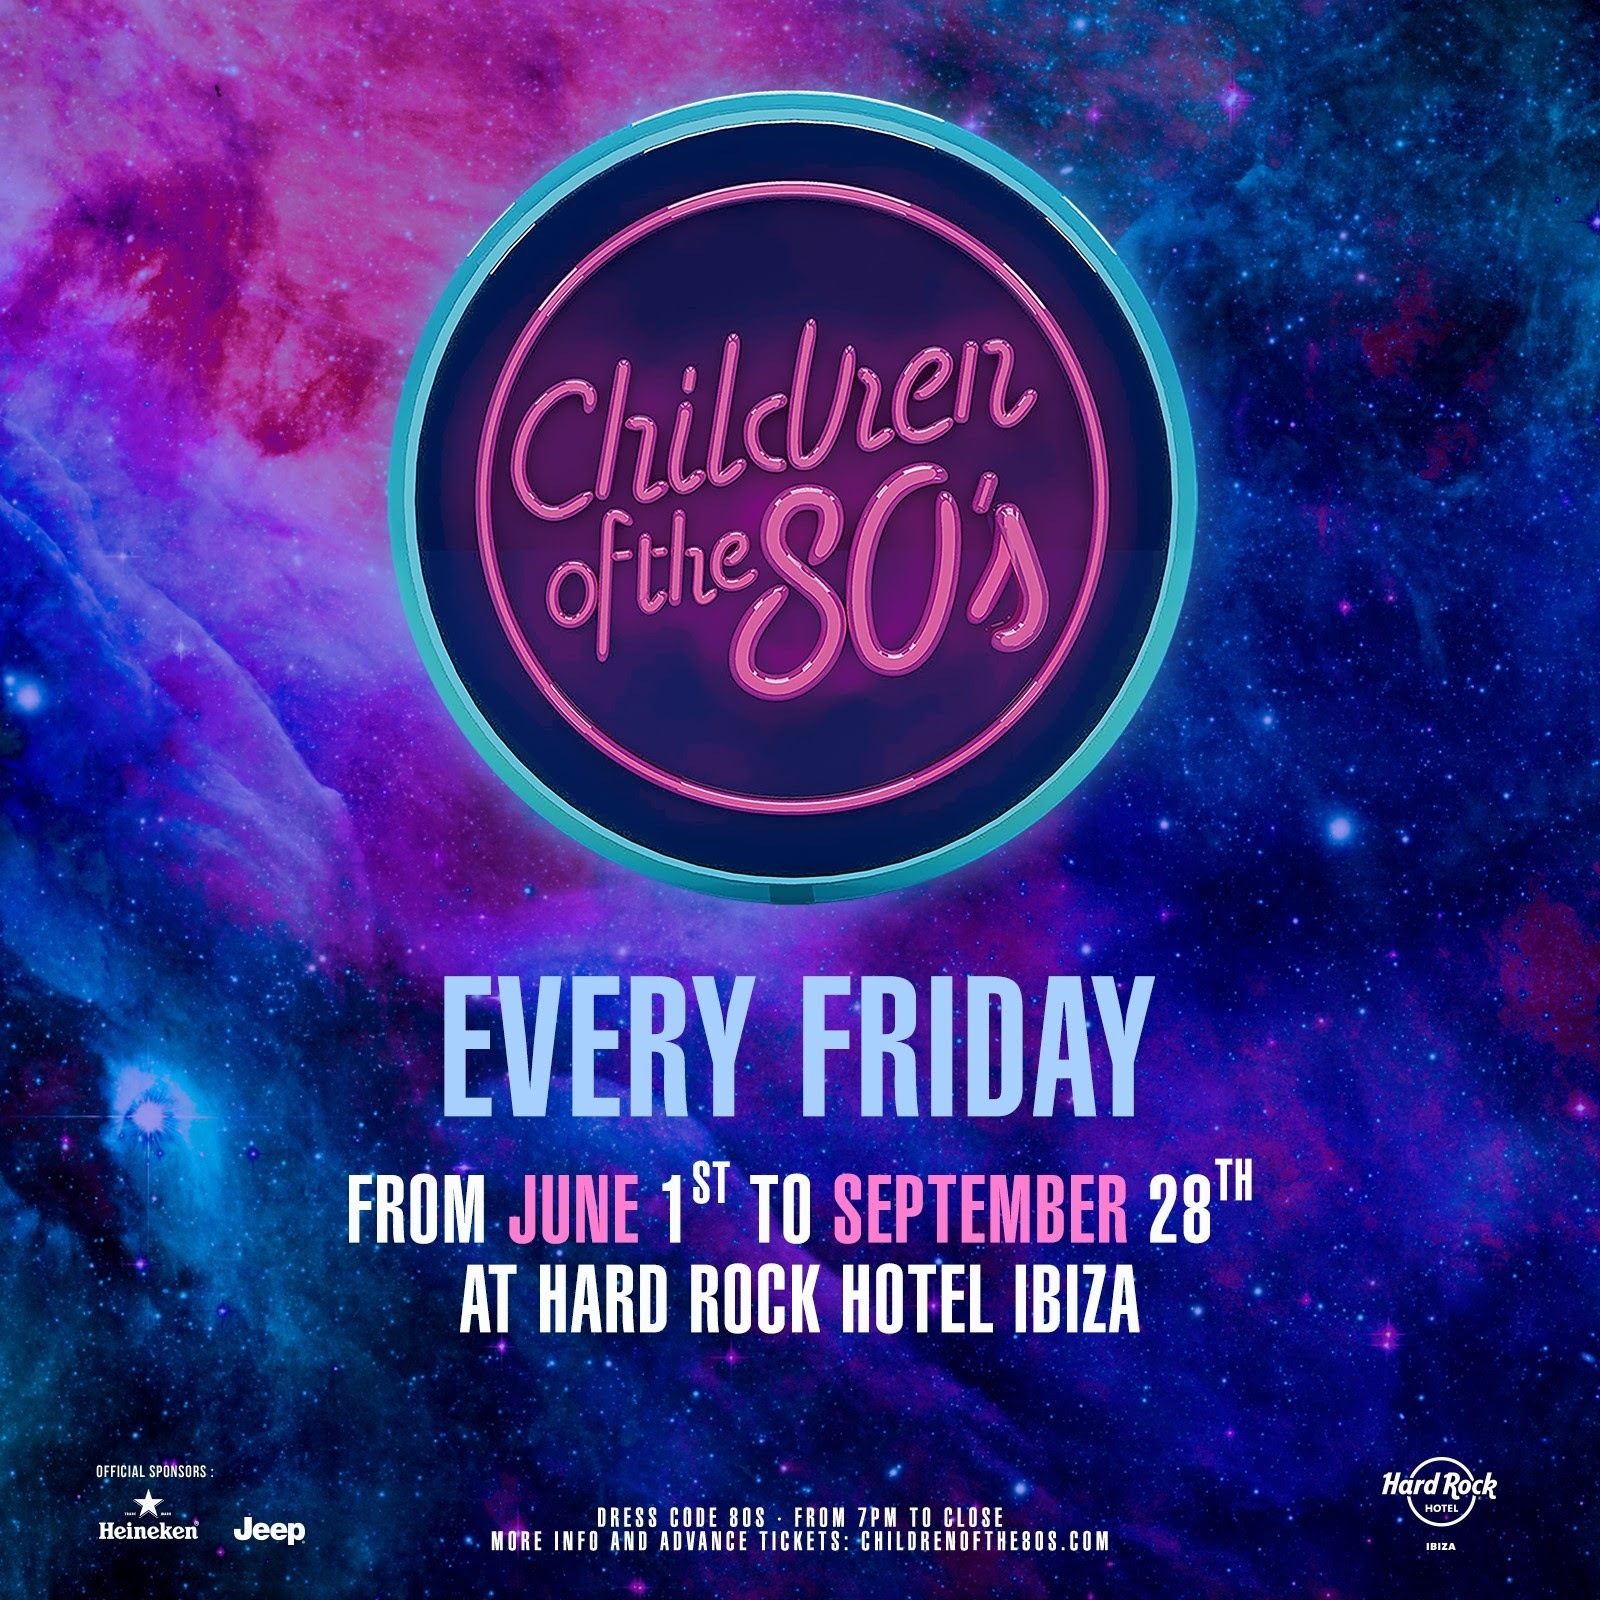 Children of the 80's returns to Hard Rock Hotel Ibiza for 2018